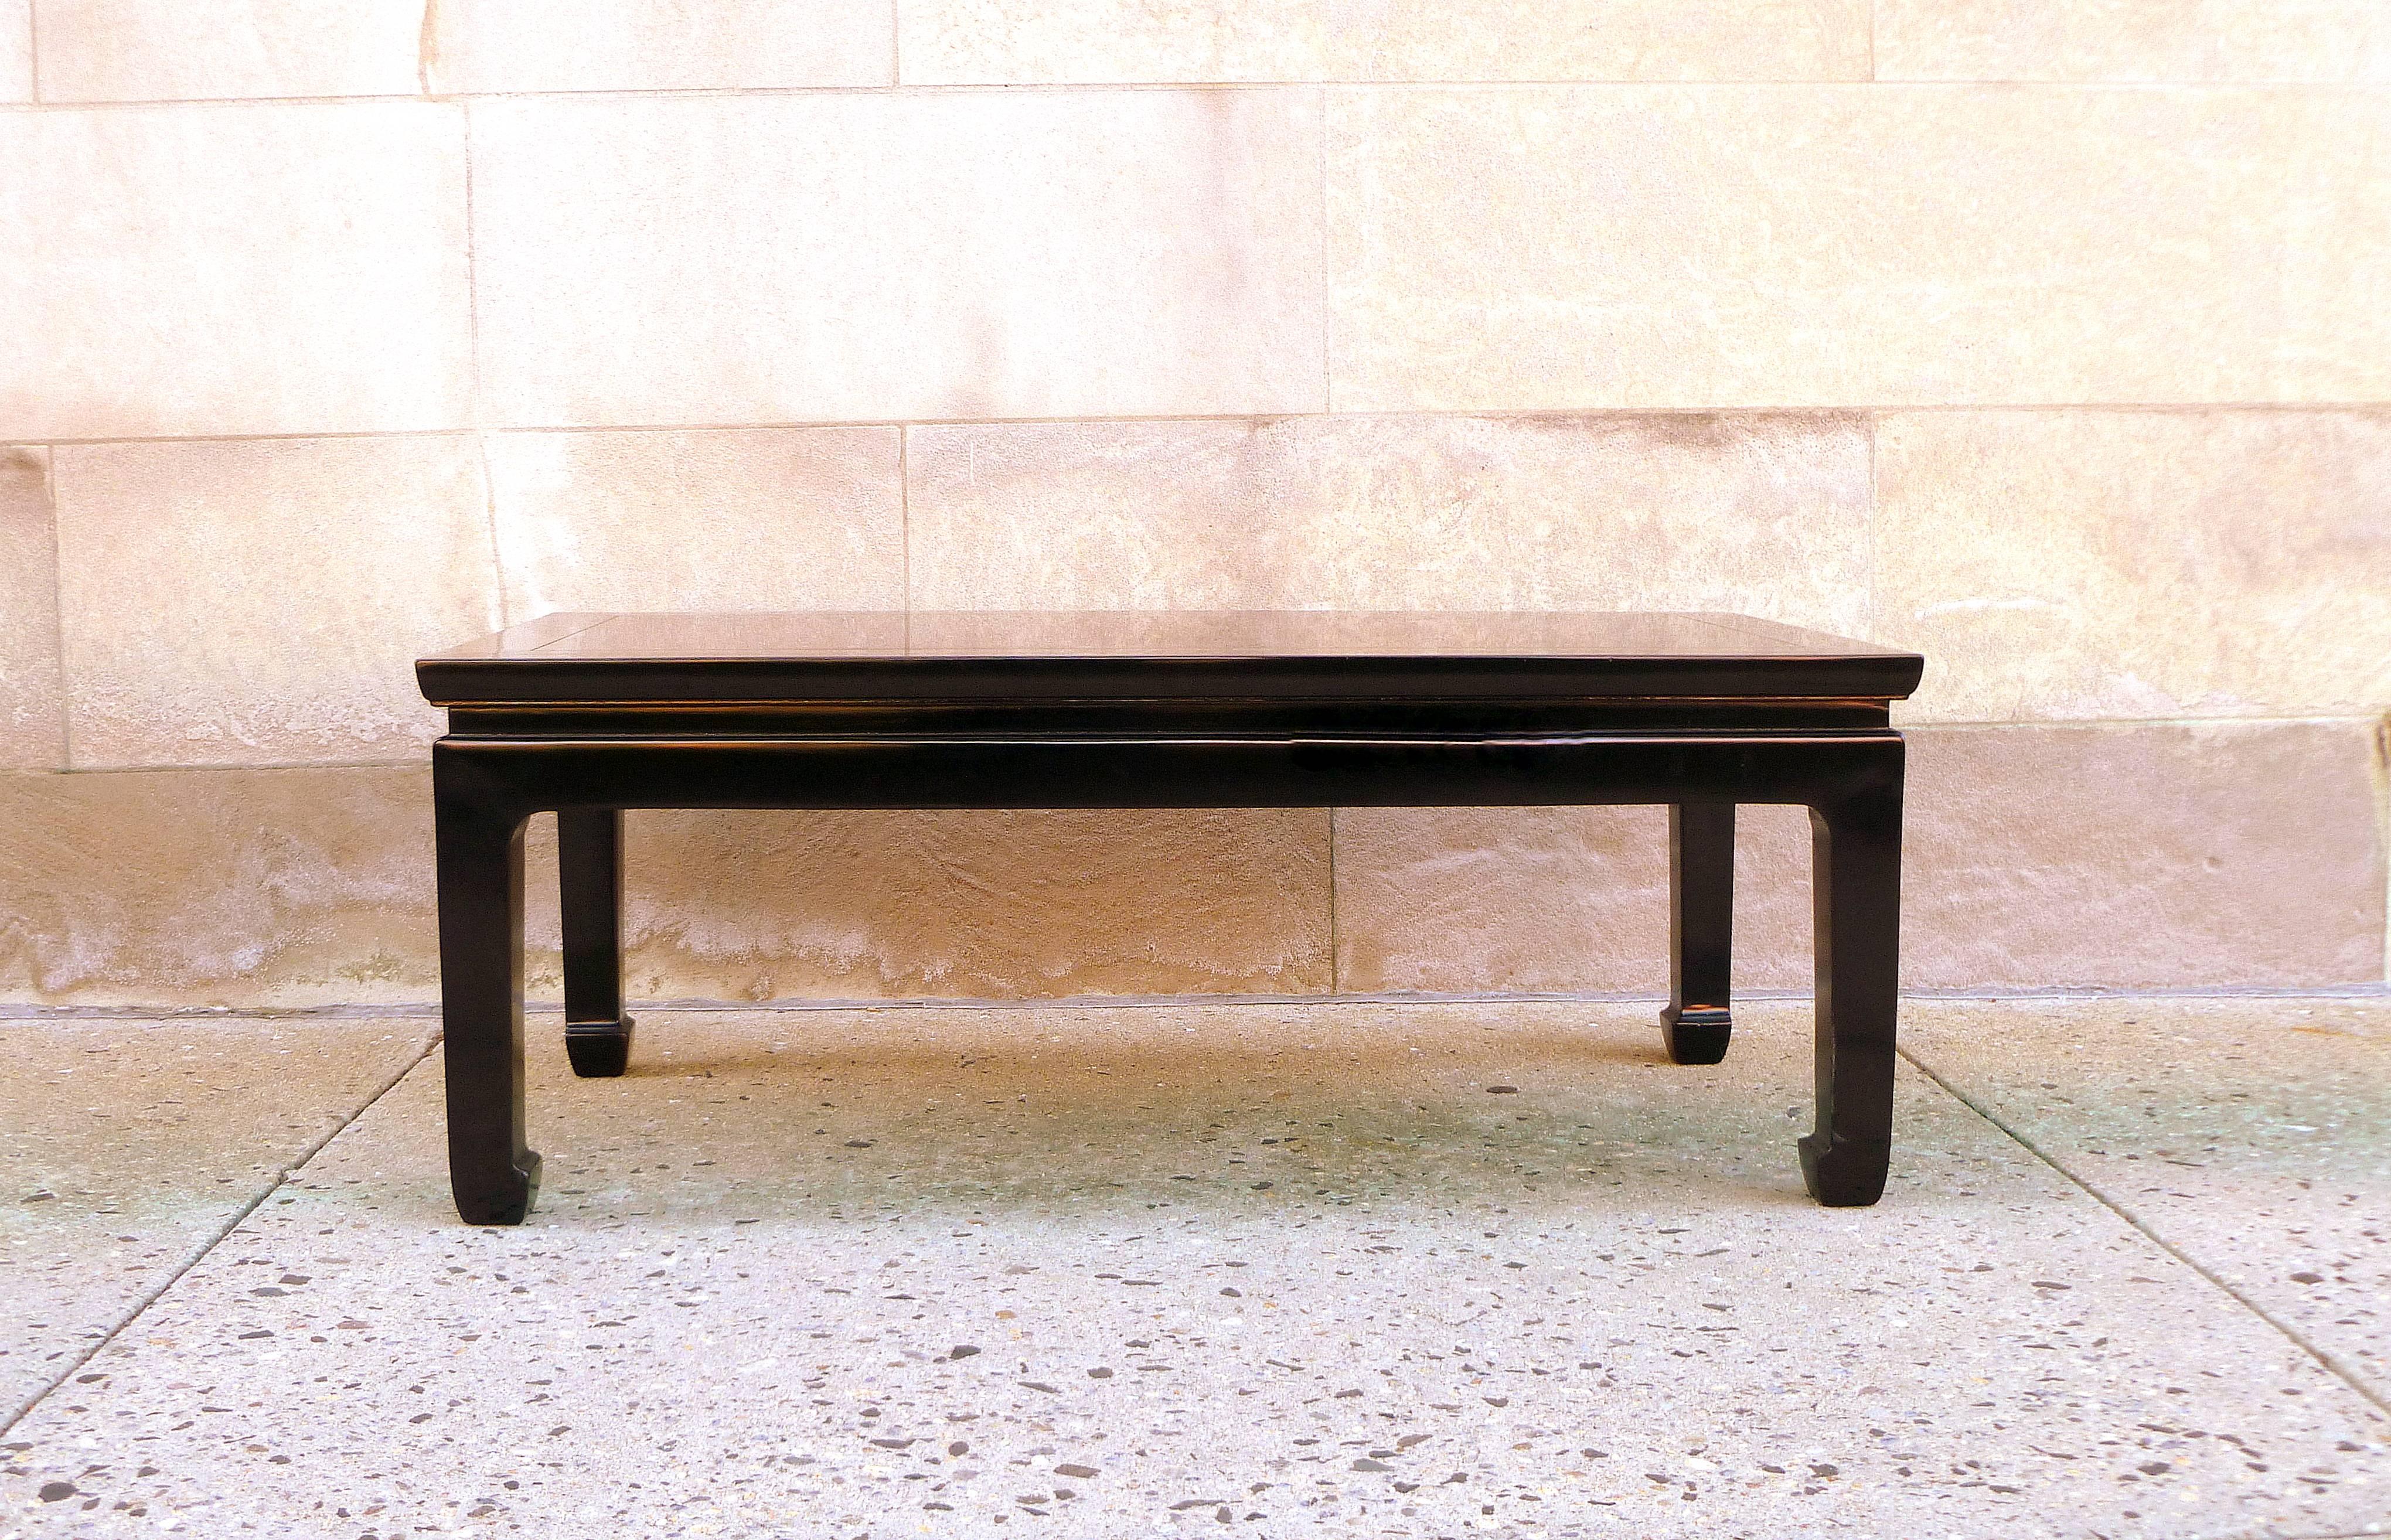 Simple and elegant black lacquer low table with straight legs.